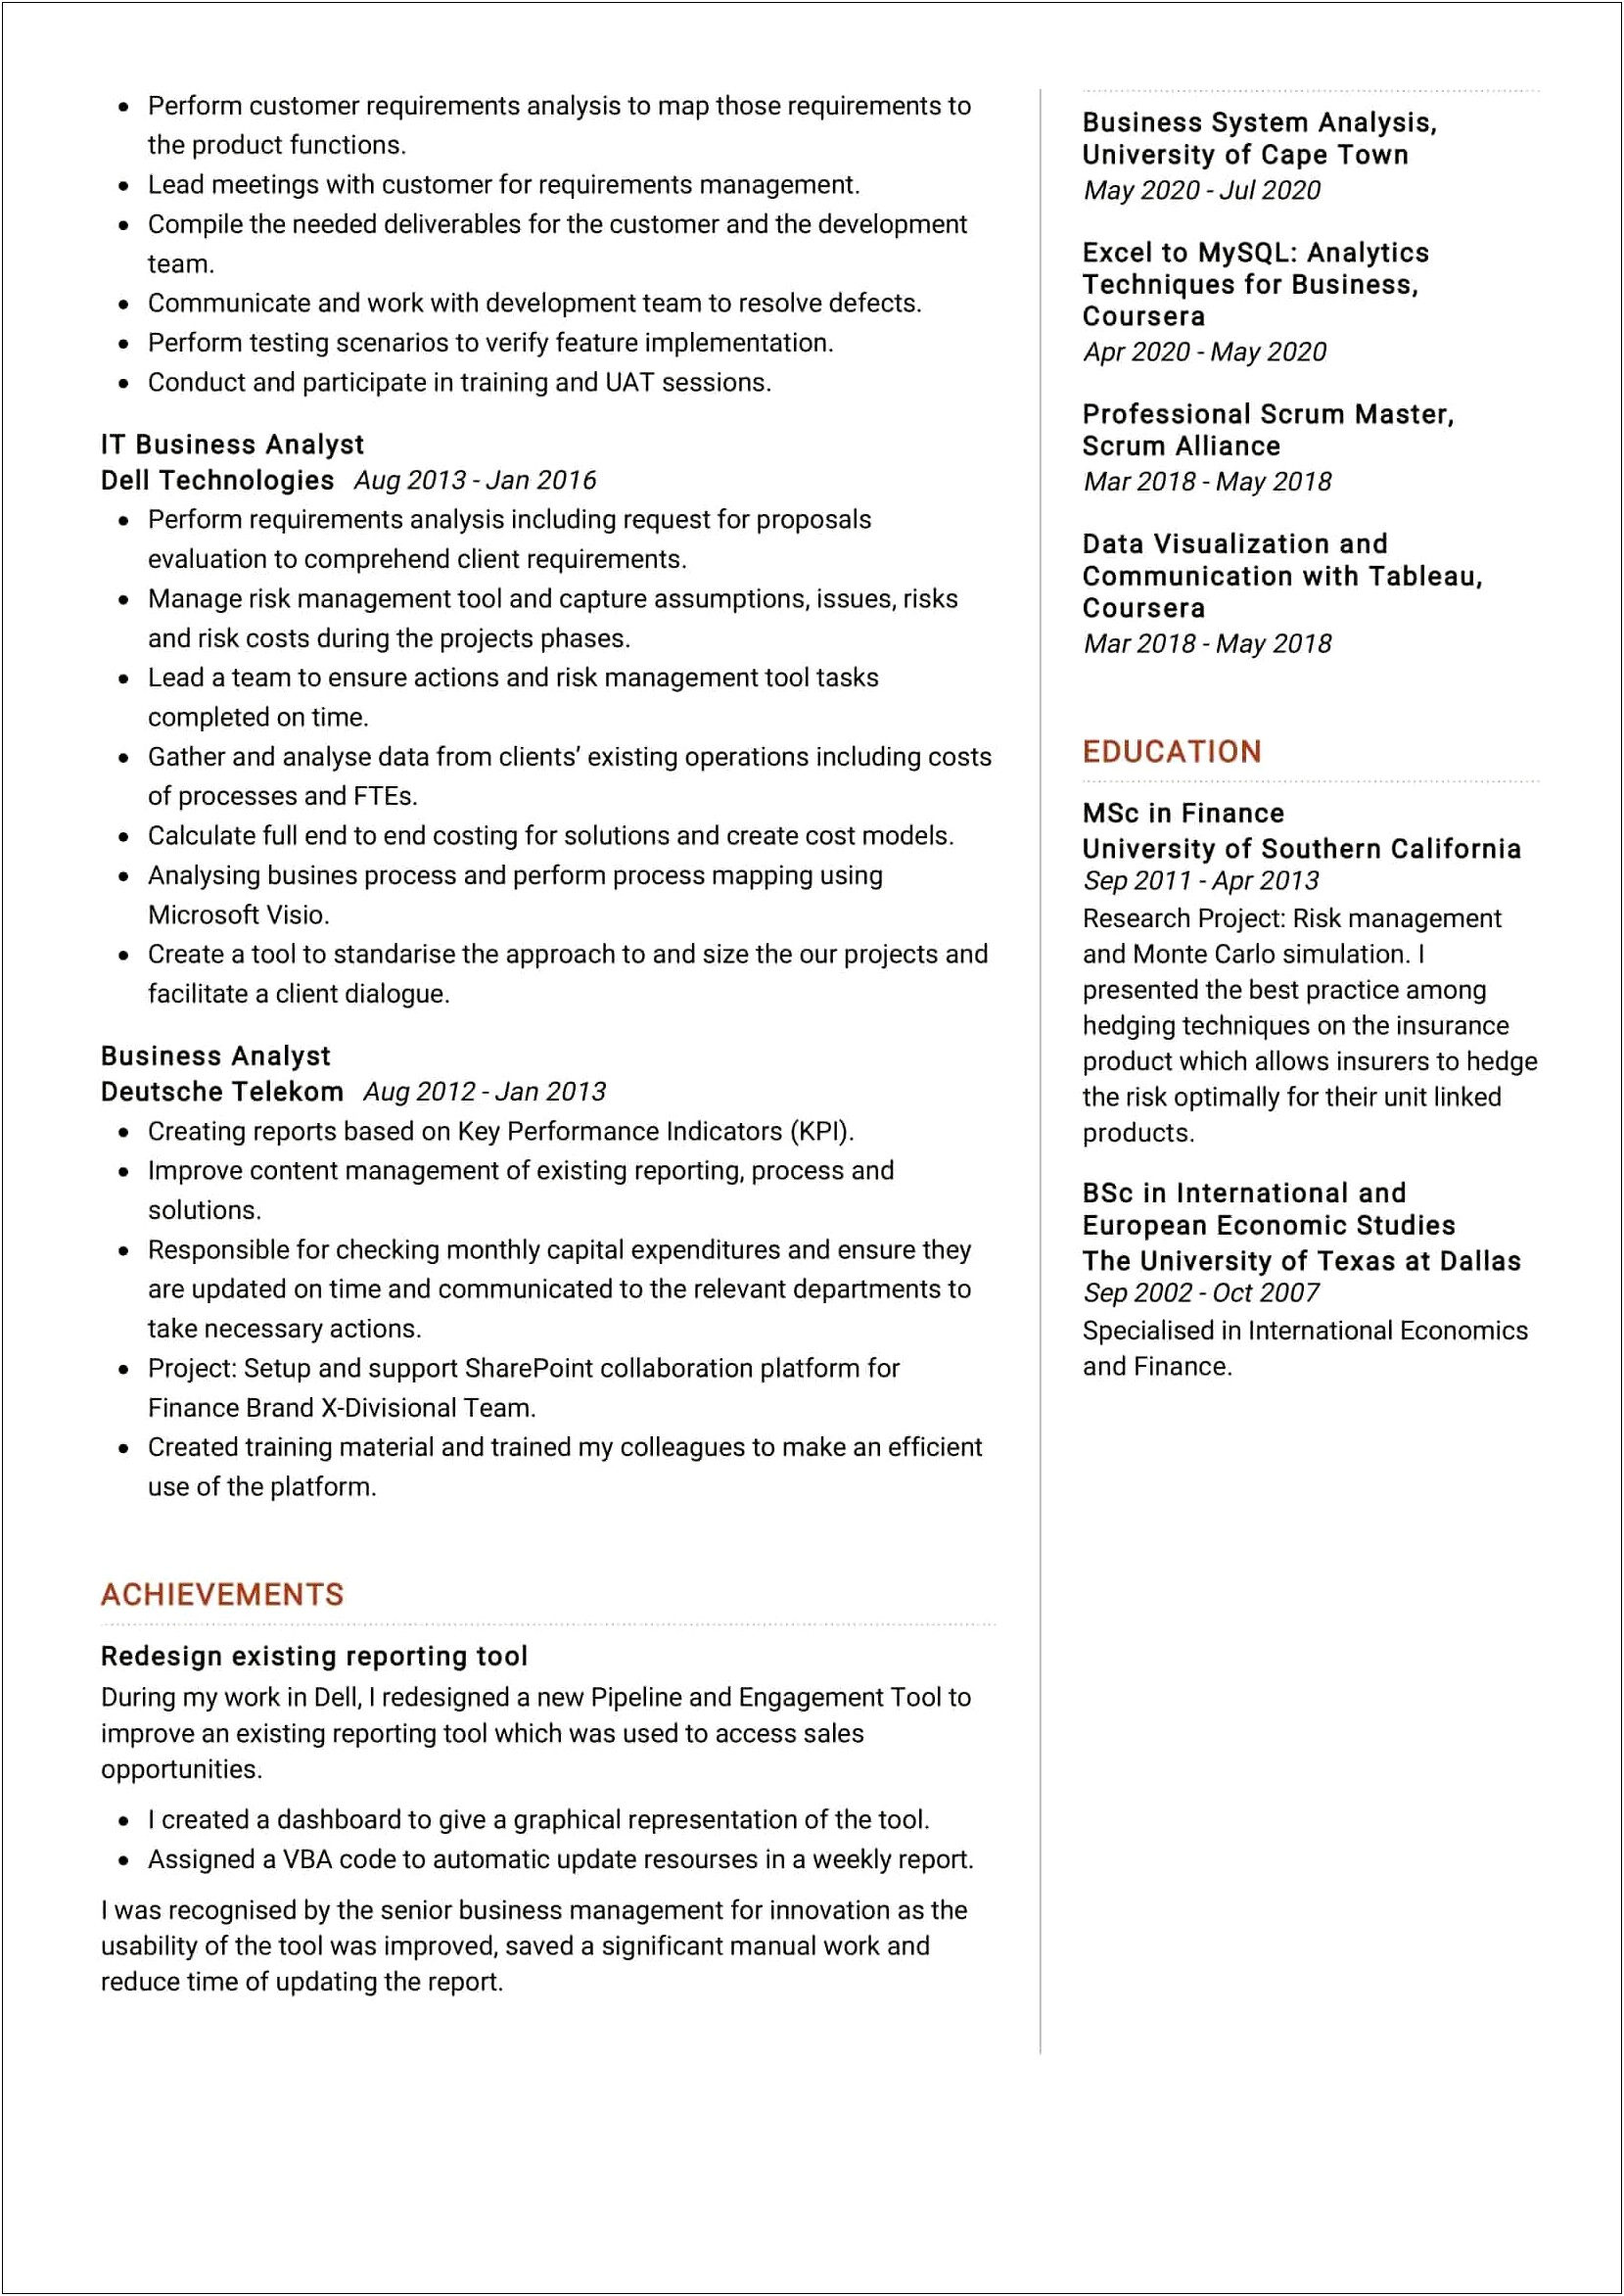 Business Analyst Resume Objective Statement